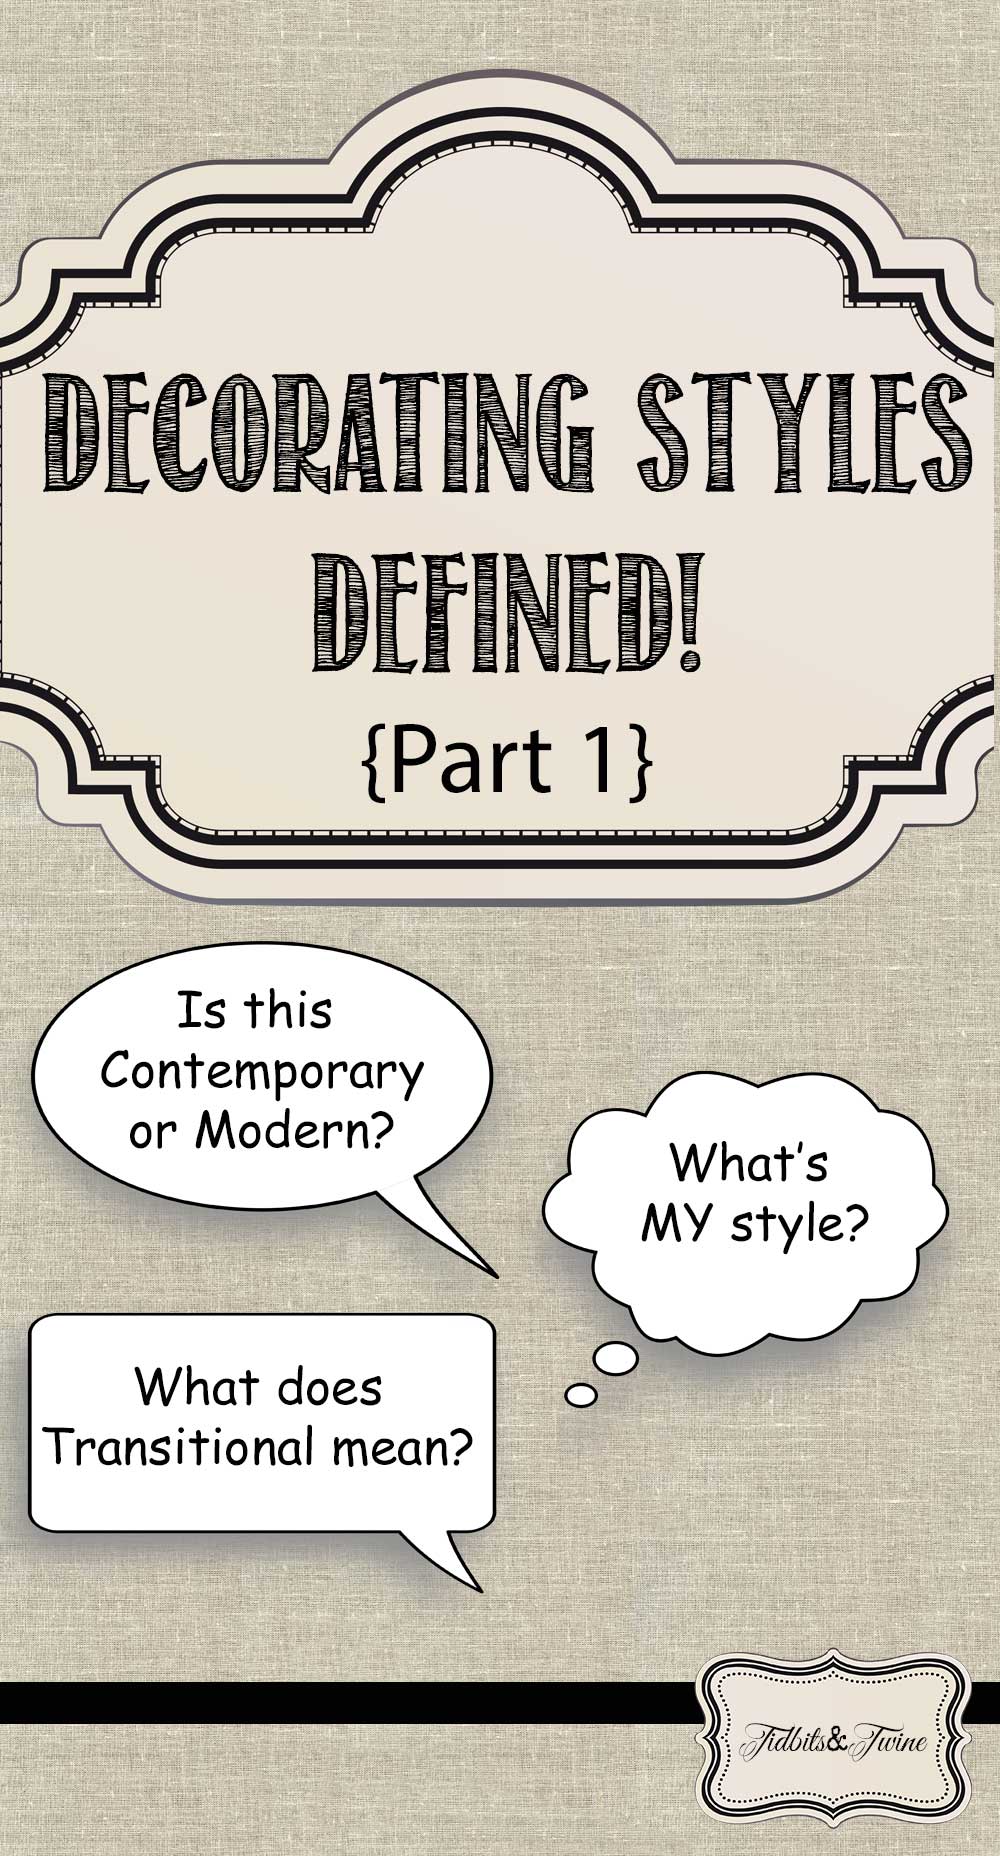 Decorating Styles Defined {Part 1}